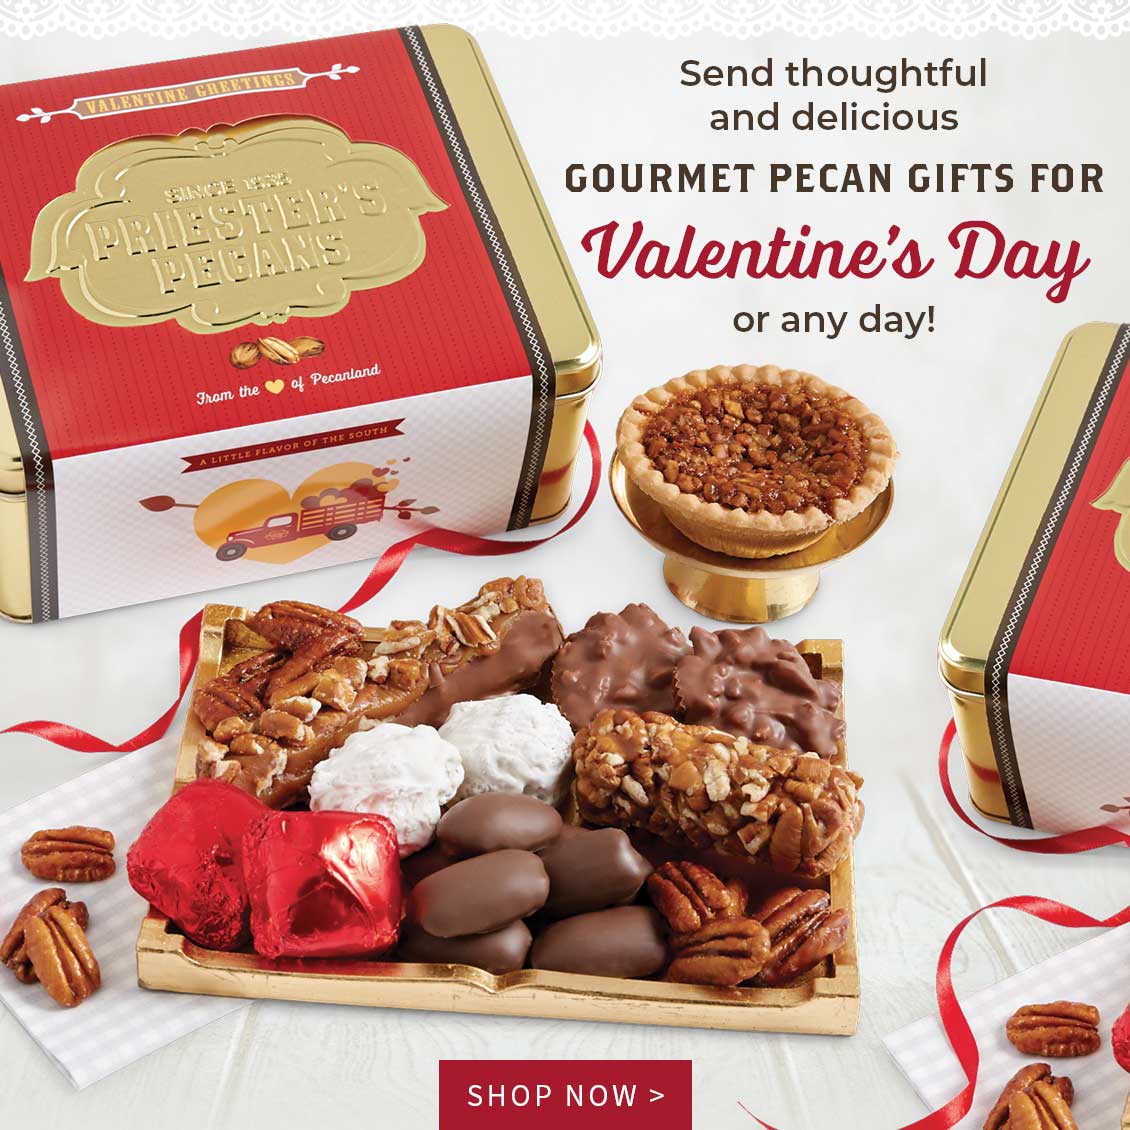 Send thoughtful and delicious GOURMET PECAN GIFTS FOR Valentine's Day or any day!